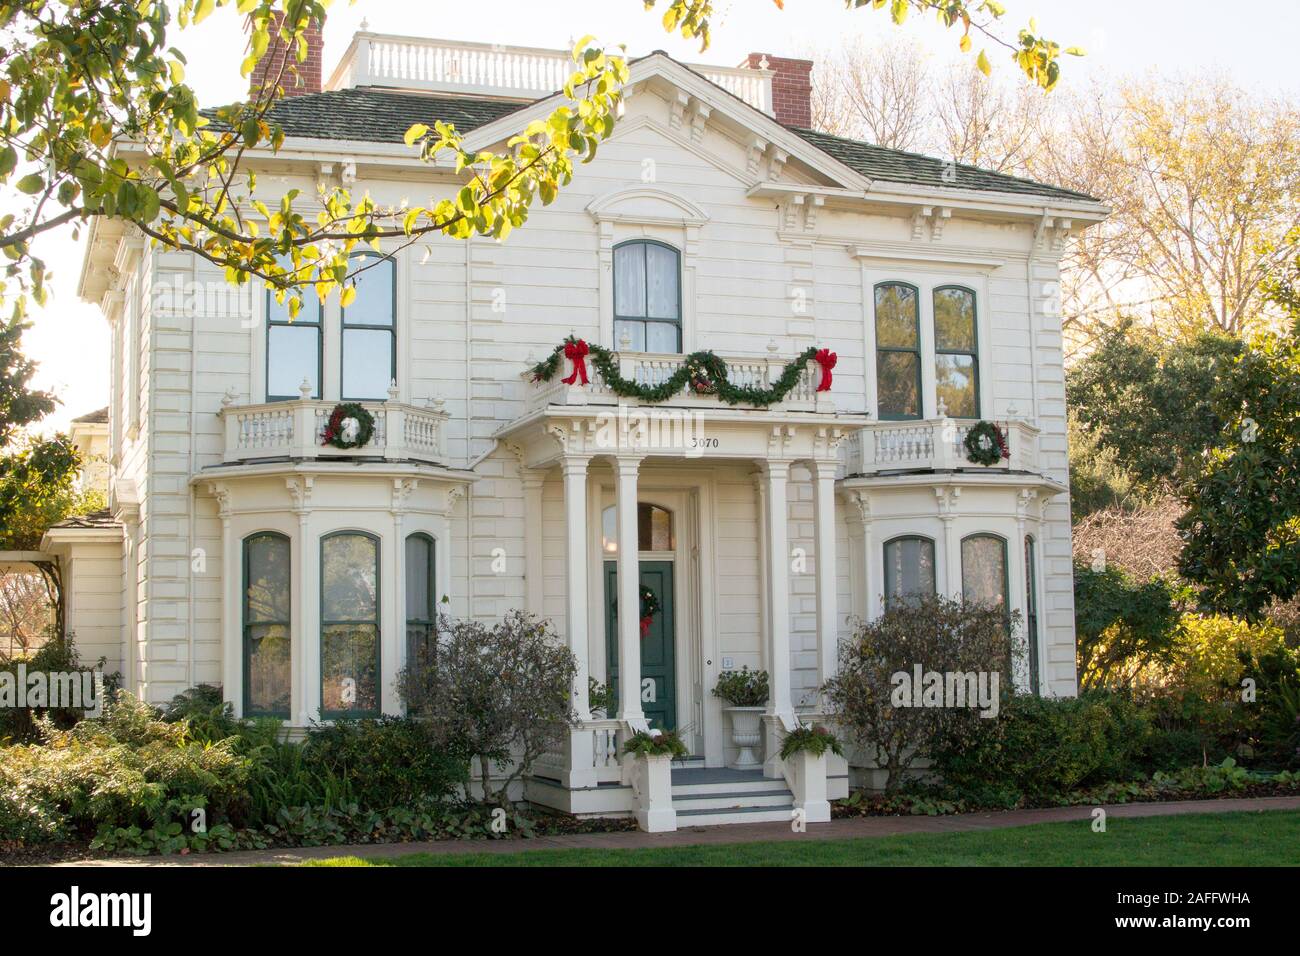 Rengstorff House, Mountain View’s oldest home, from the 1860s gold rush era, restored and decorated for Christmas. Victorian Italianate architecture. Stock Photo